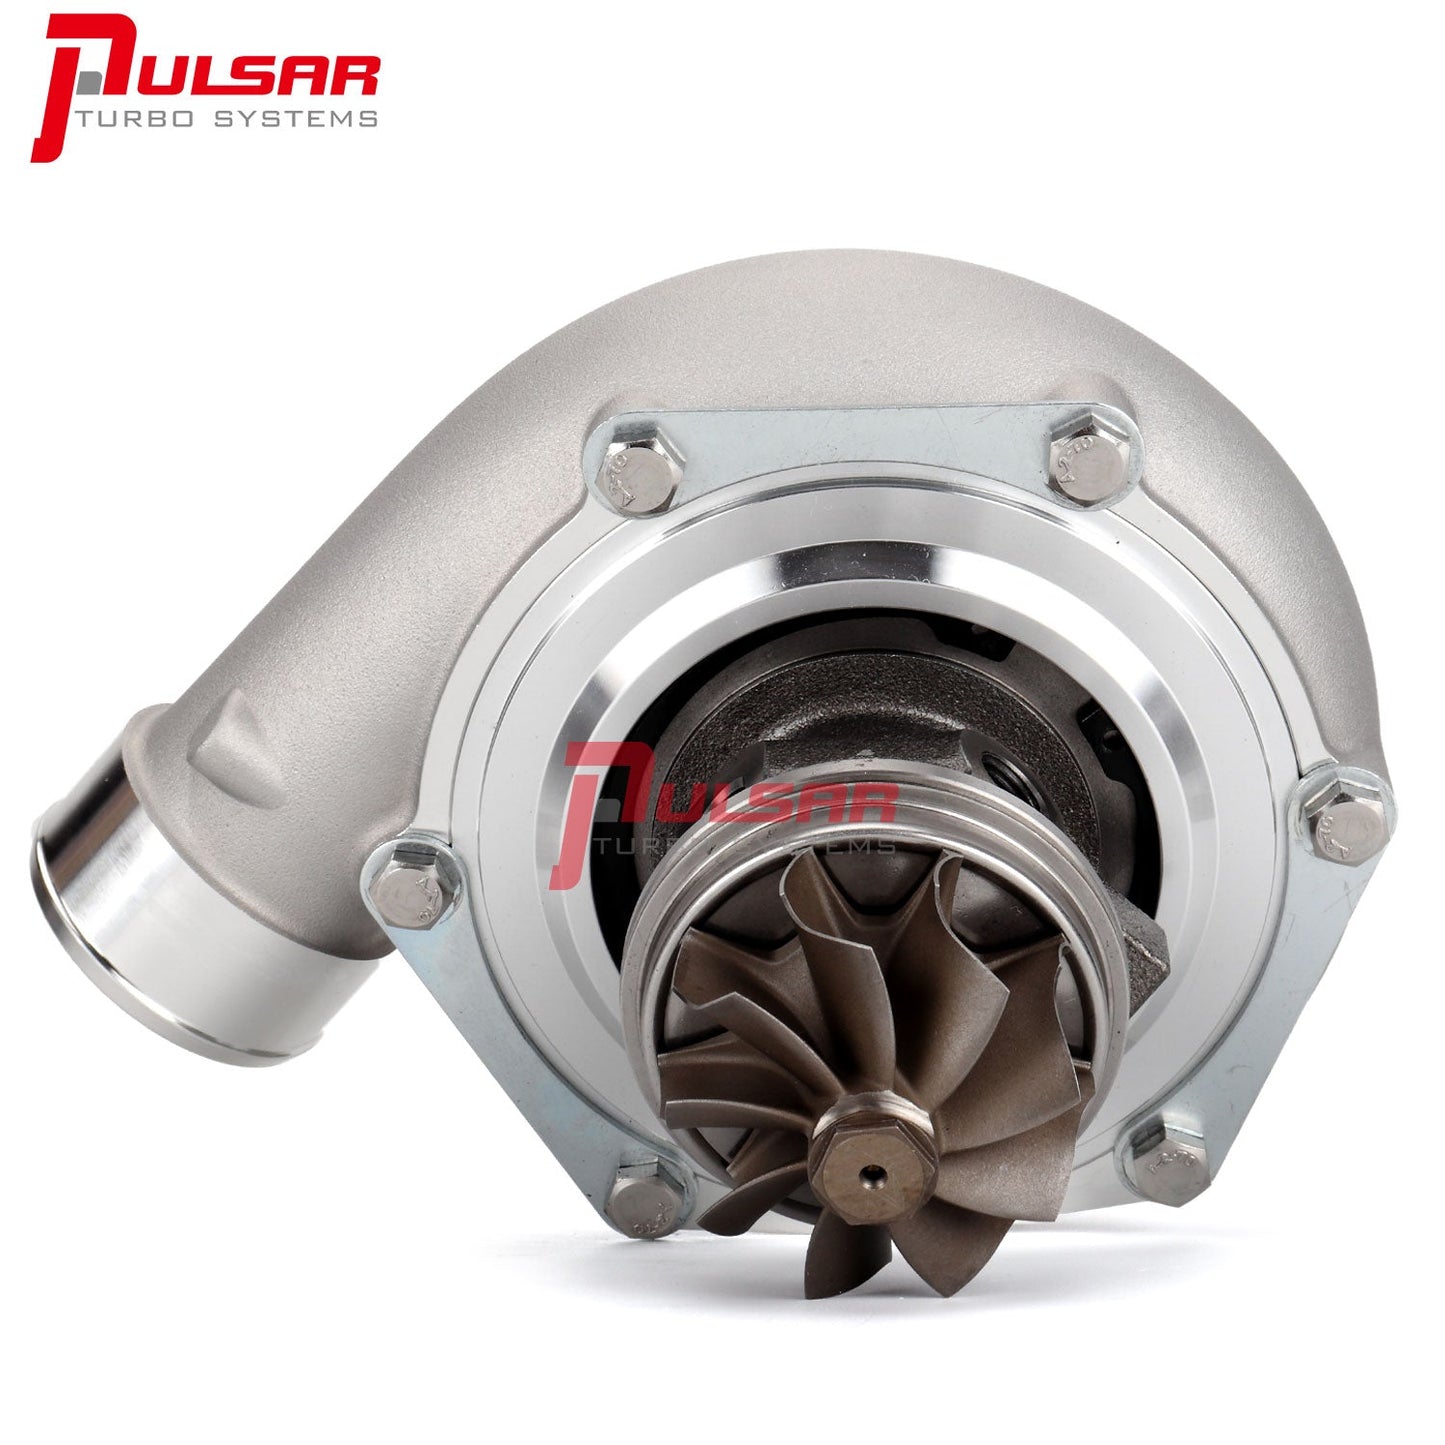 PULSAR Next GEN GTX3582 Supercore for Ford Falcon to replace the factory GT3582R